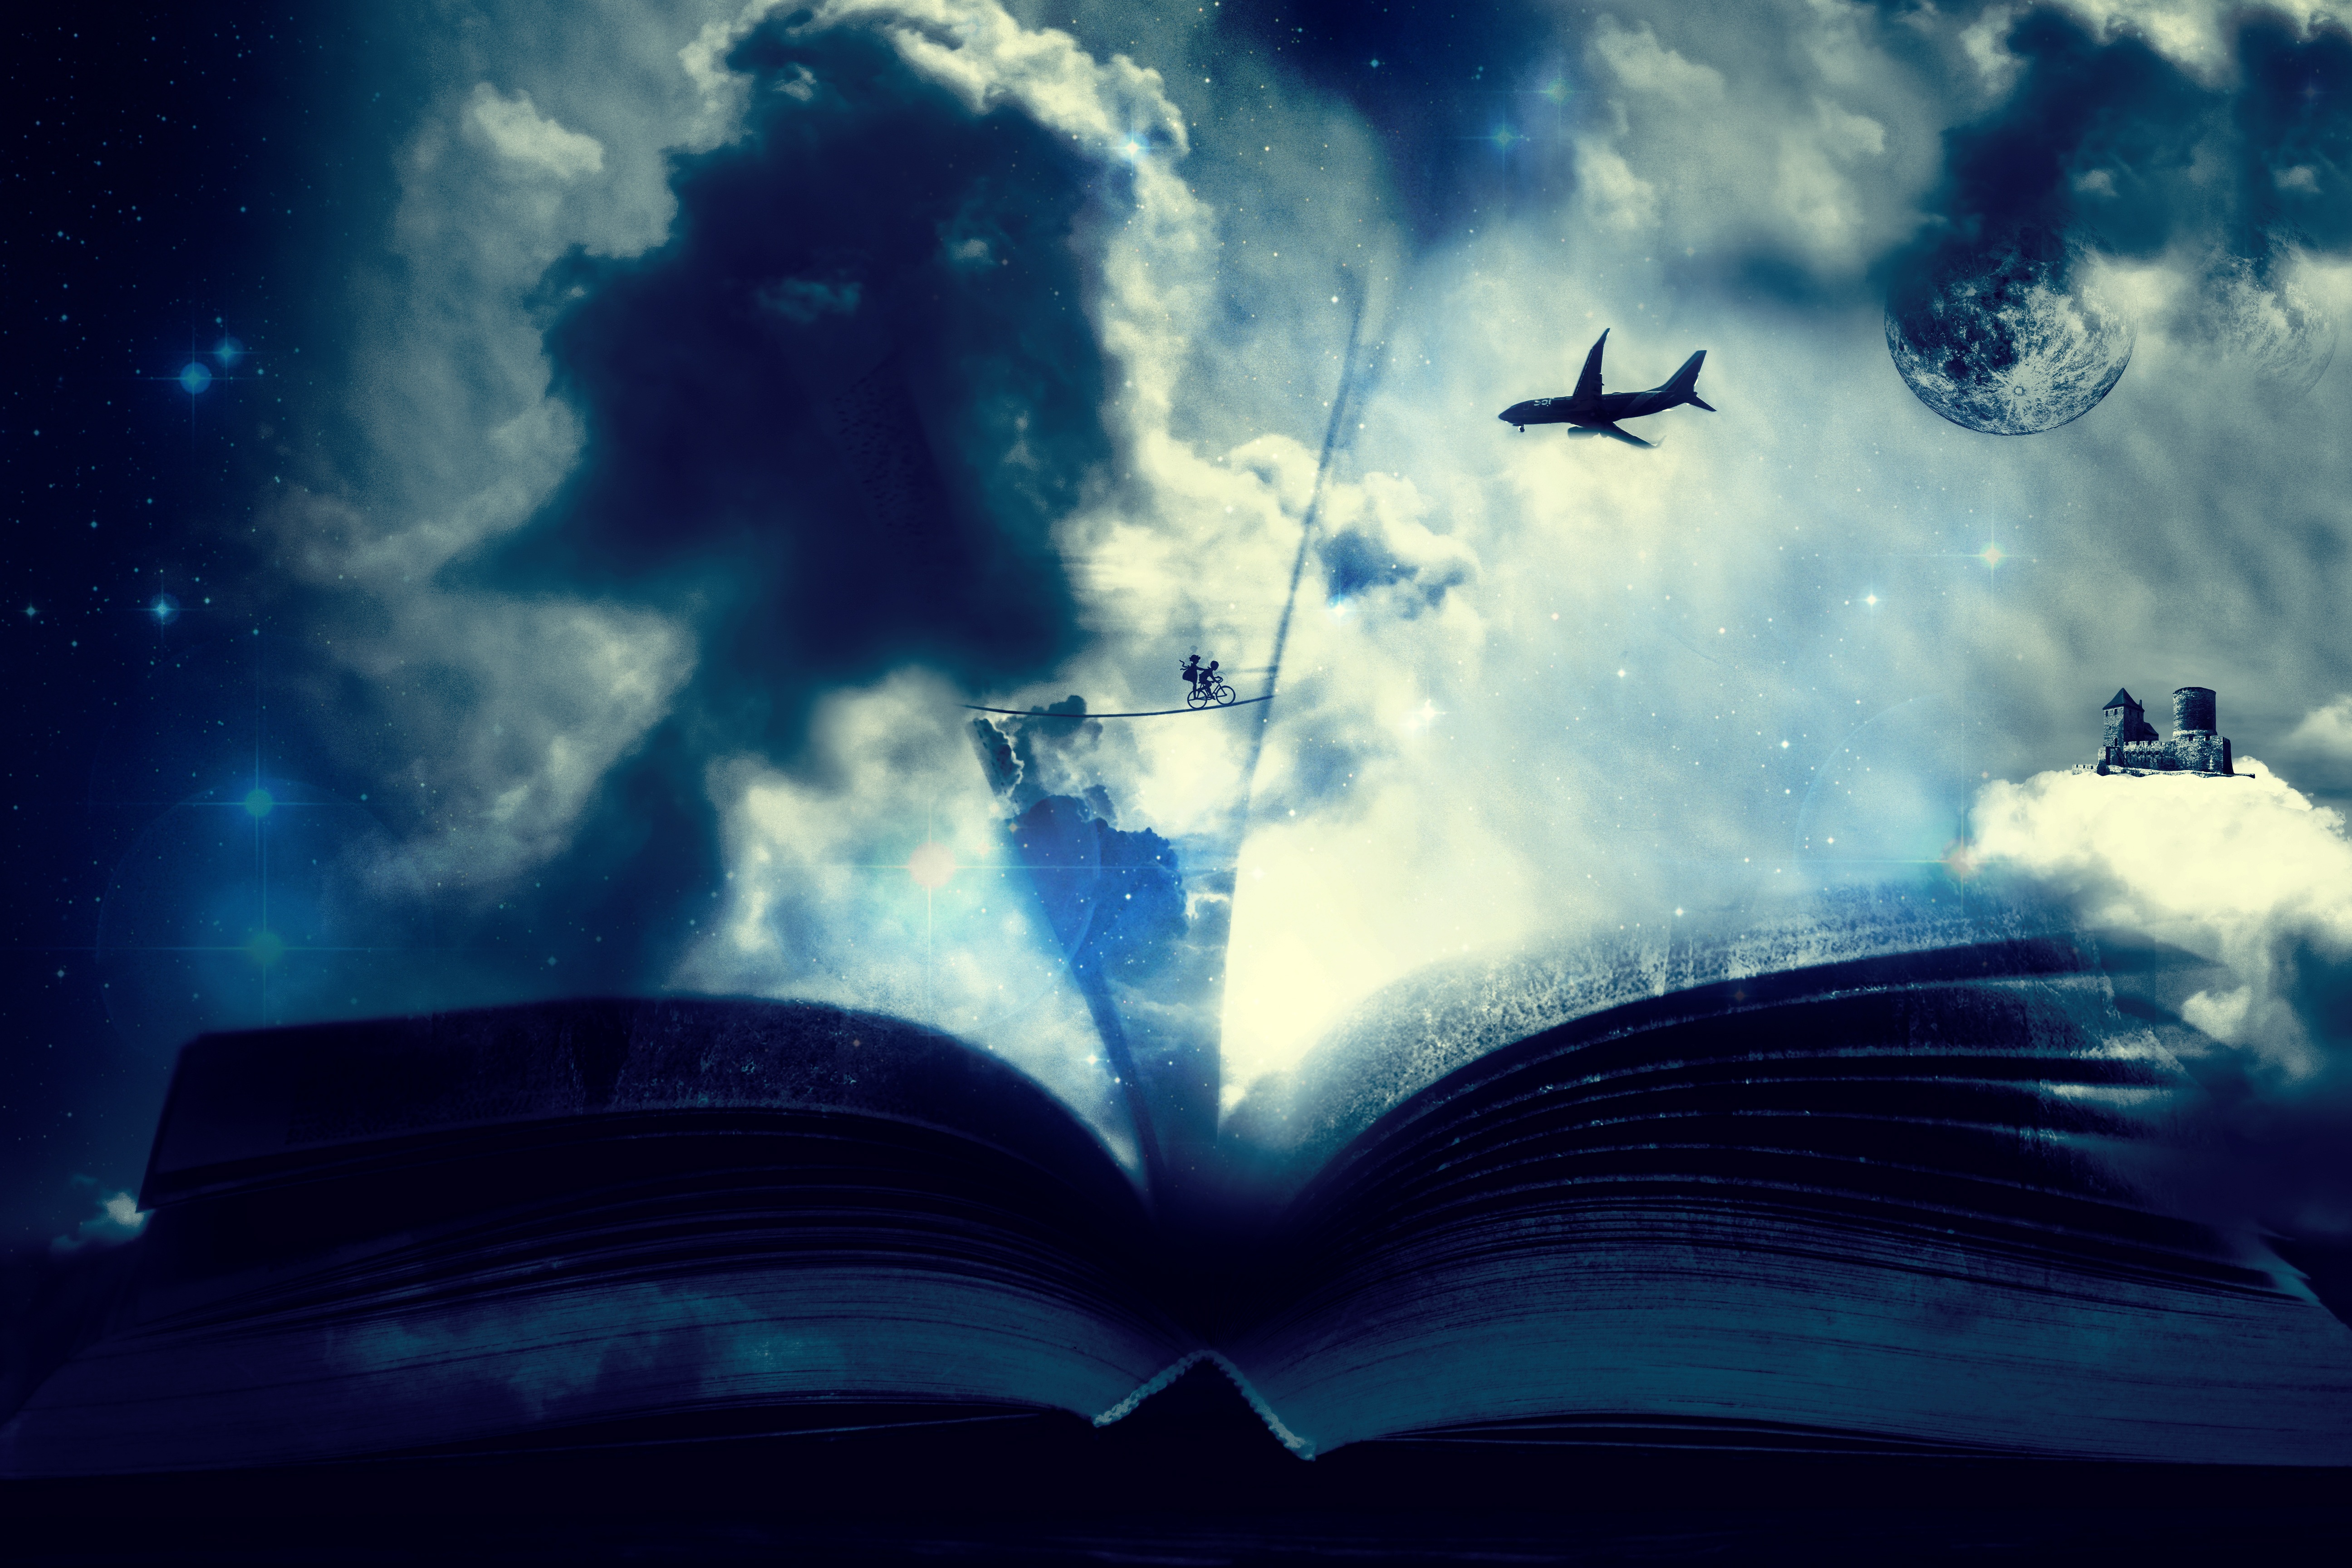 book, plane, fantasy, art, clouds, airplane, bicycle wallpapers for tablet